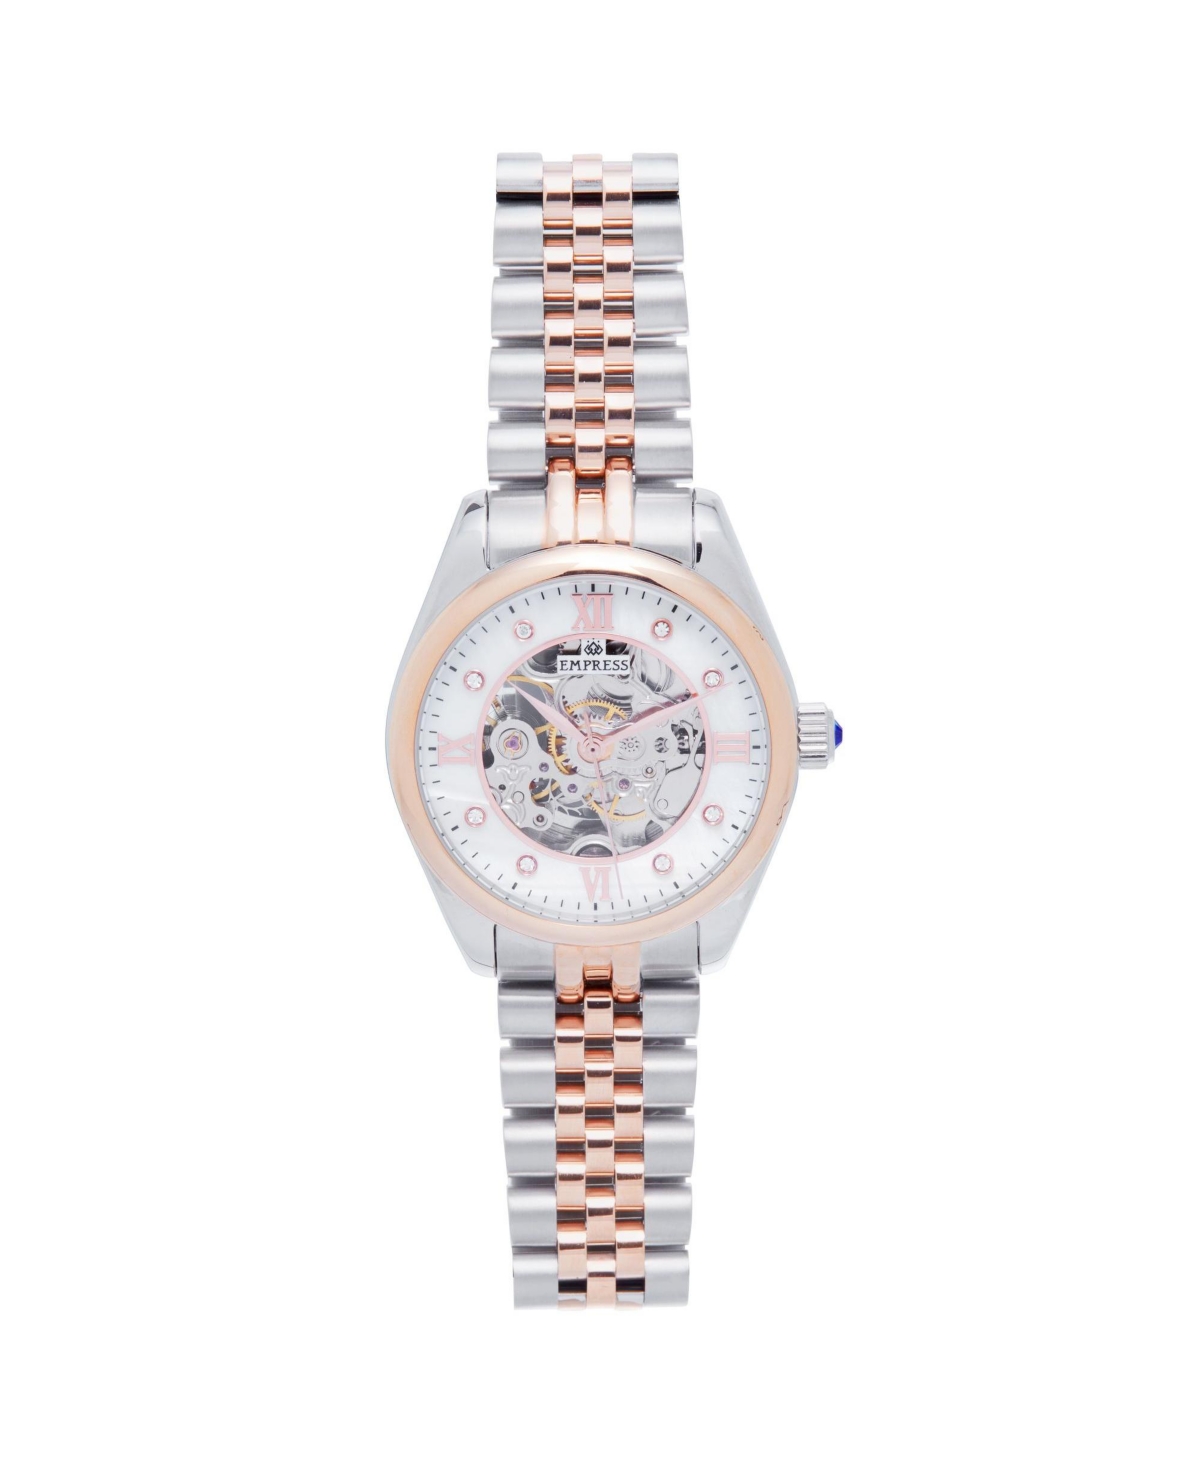 Empress Women Magnolia Stainless Steel Watch - Silver/Rose Gold, 37mm